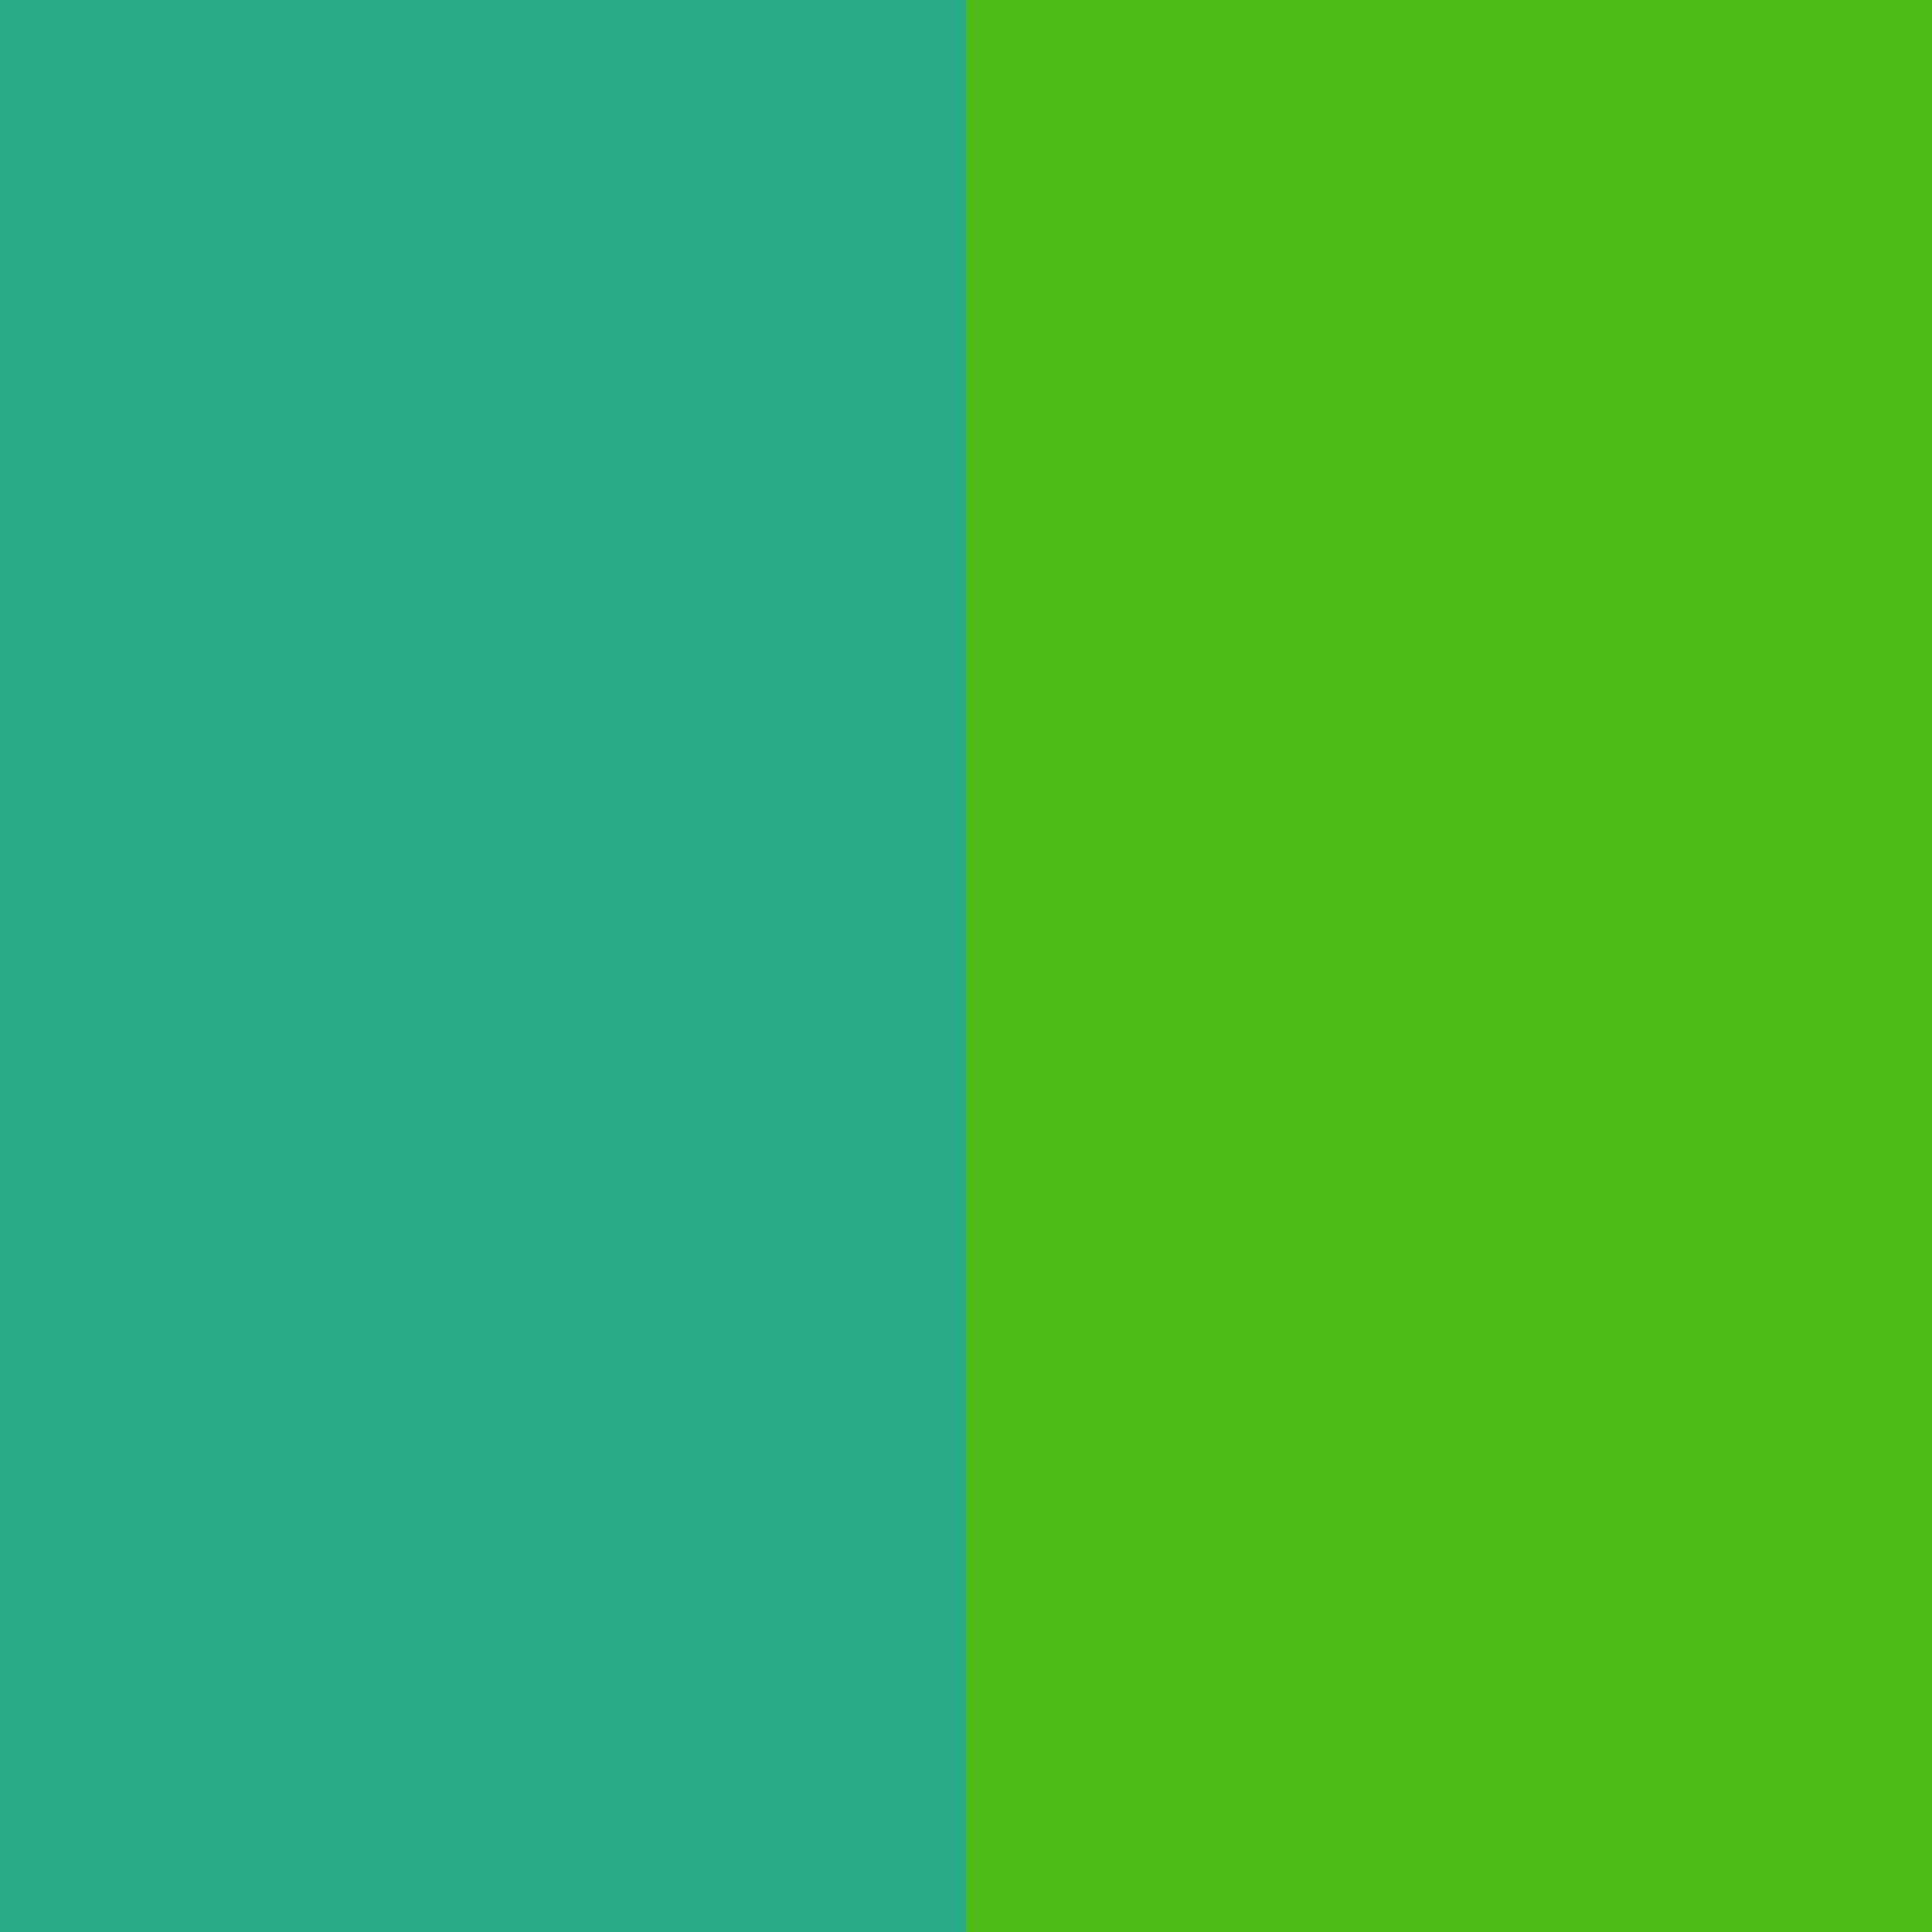 Free 2048x2048 resolution Jungle Green and Kelly Green solid two color 2048x2048